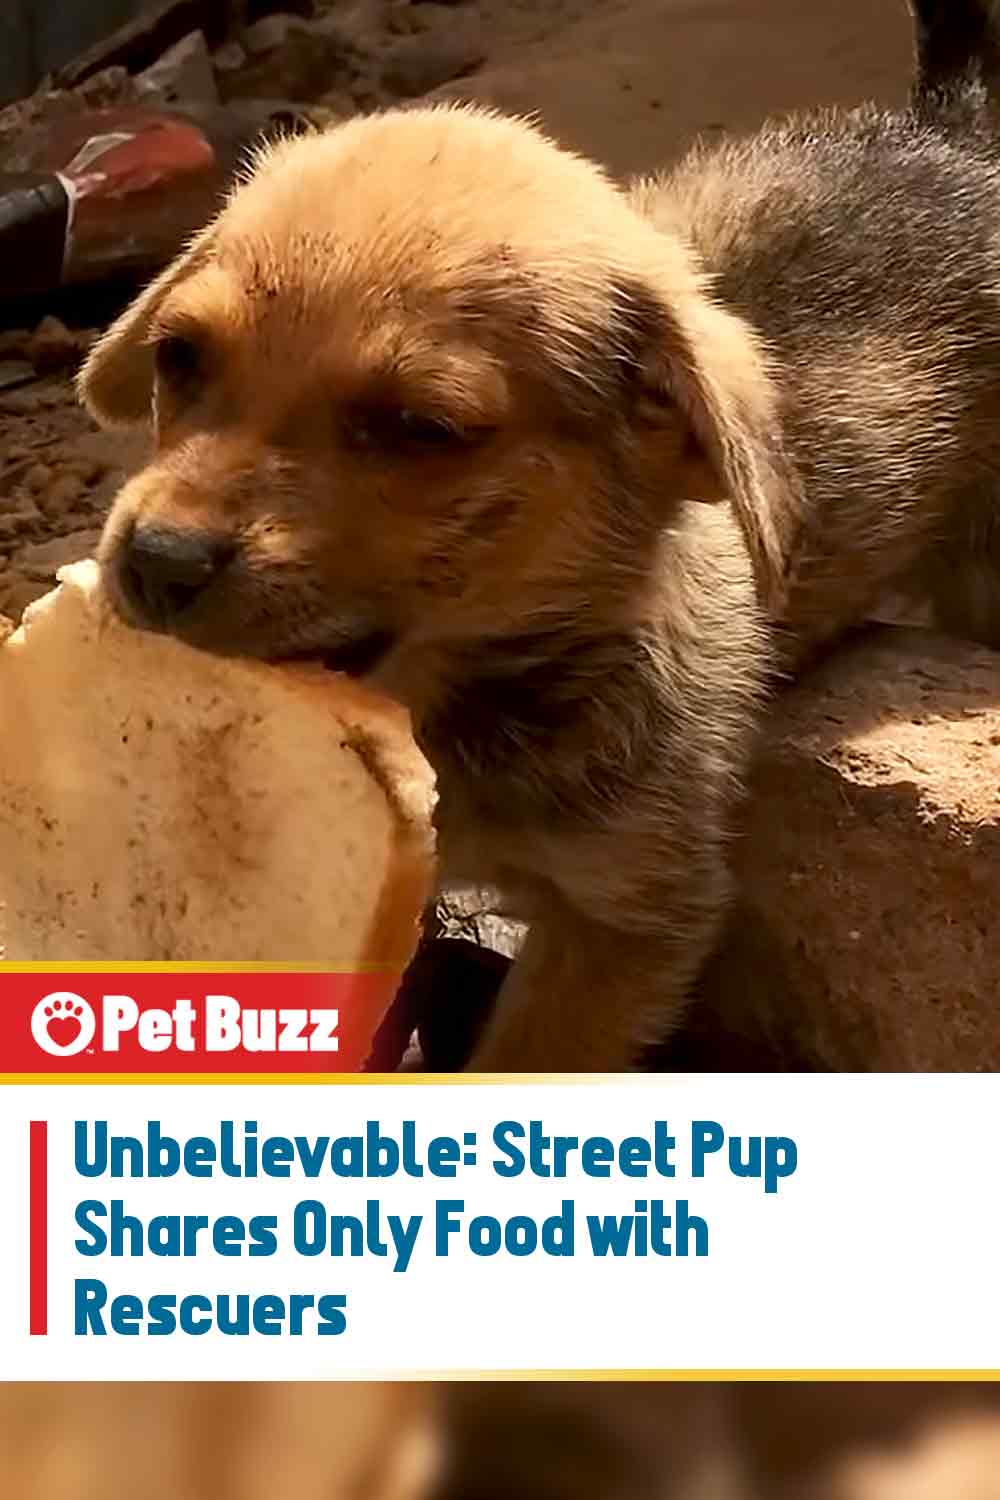 Unbelievable: Street Pup Shares Only Food with Rescuers